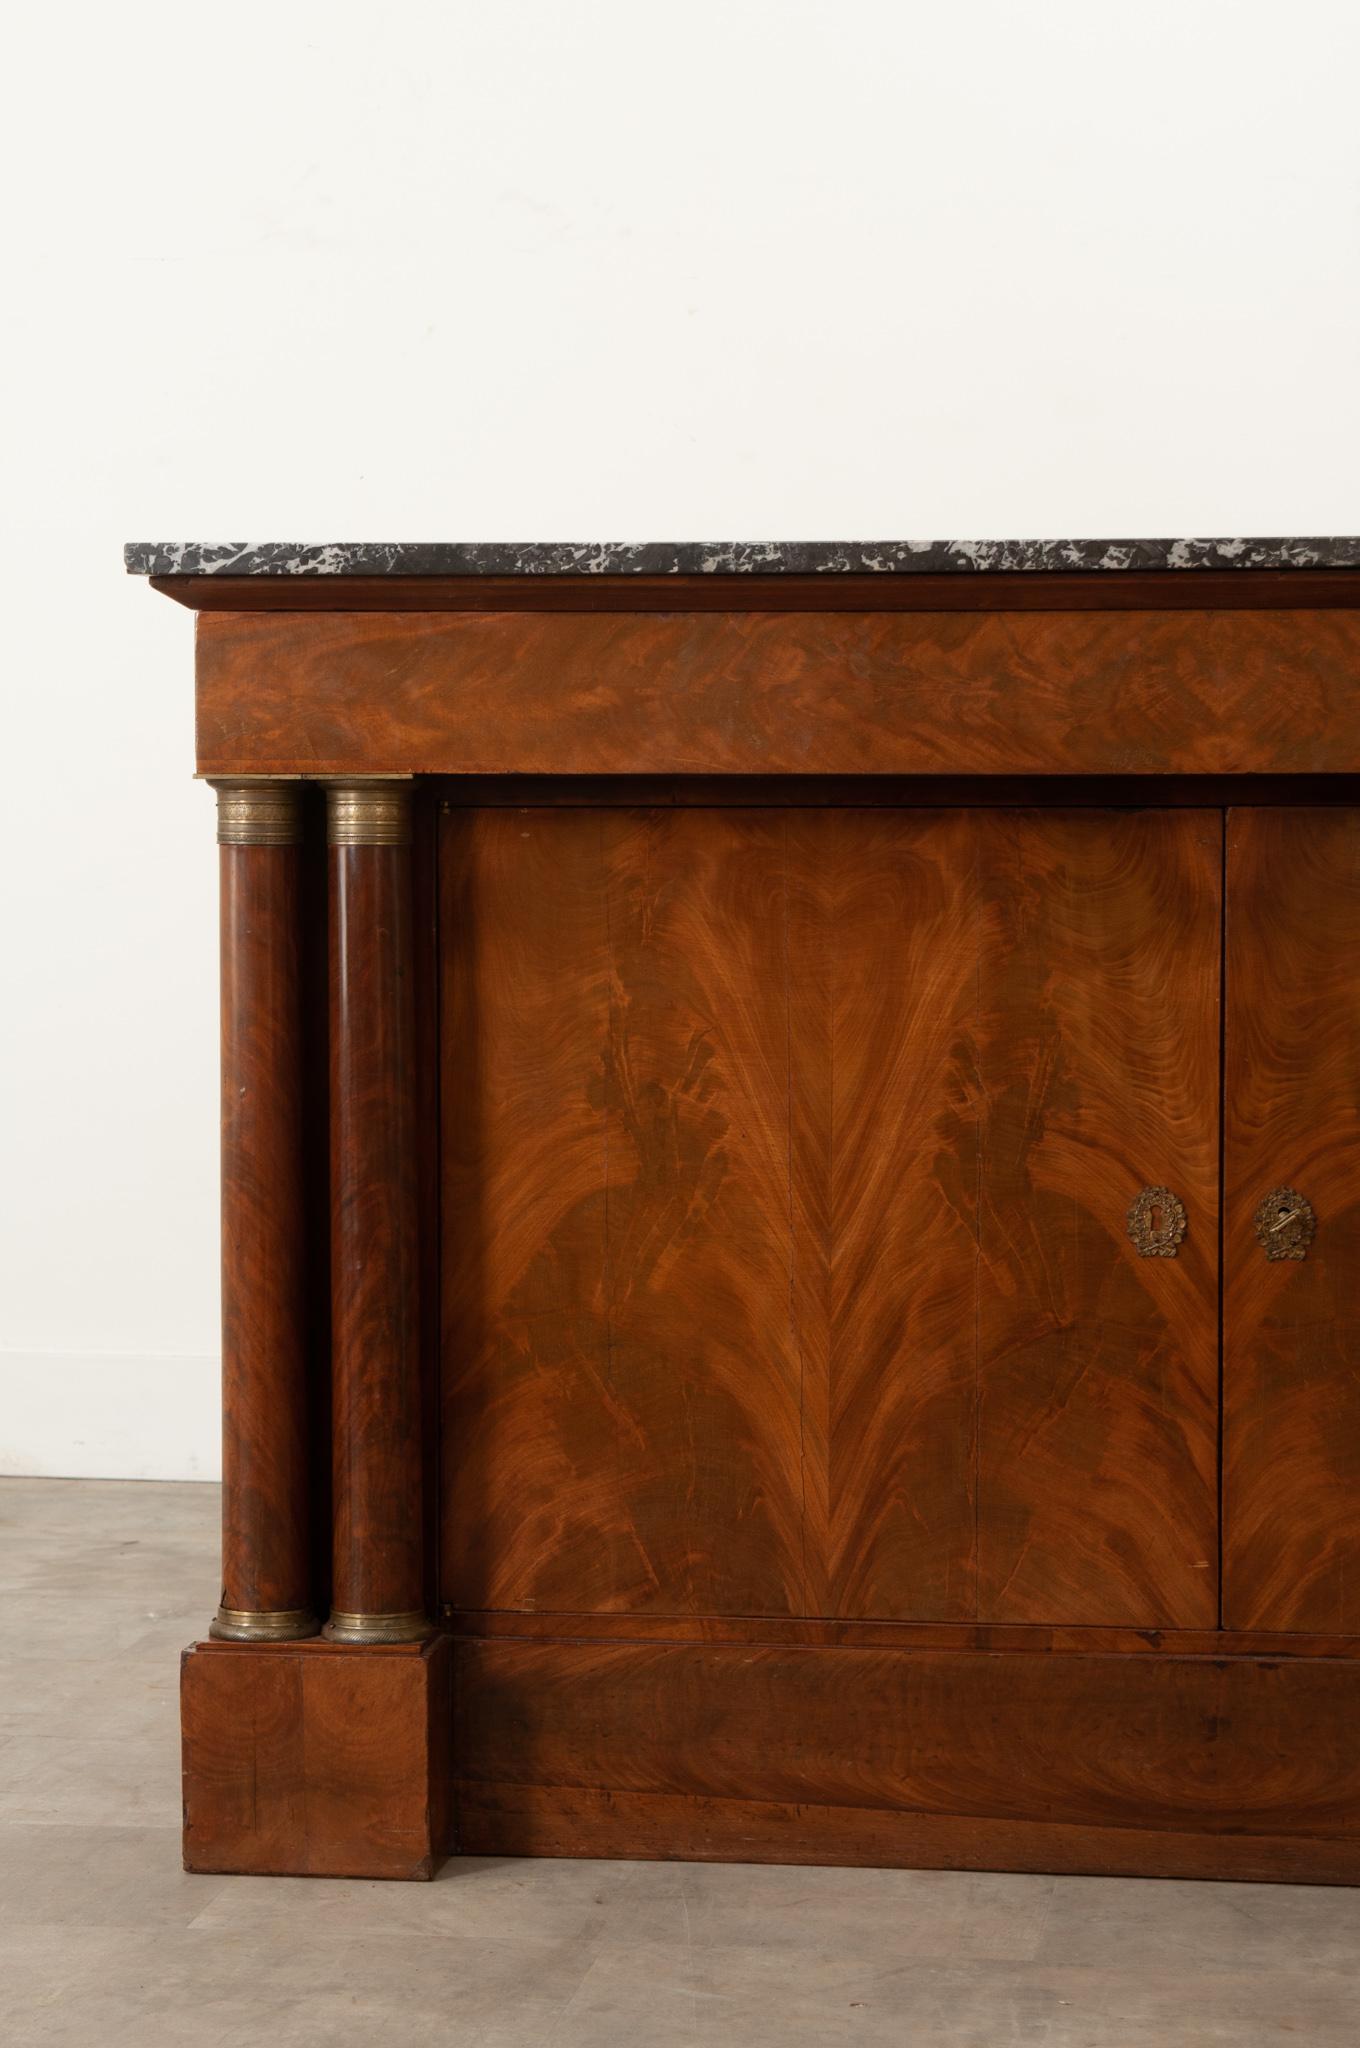 French 19th Century Mahogany Empire Buffet In Good Condition For Sale In Baton Rouge, LA